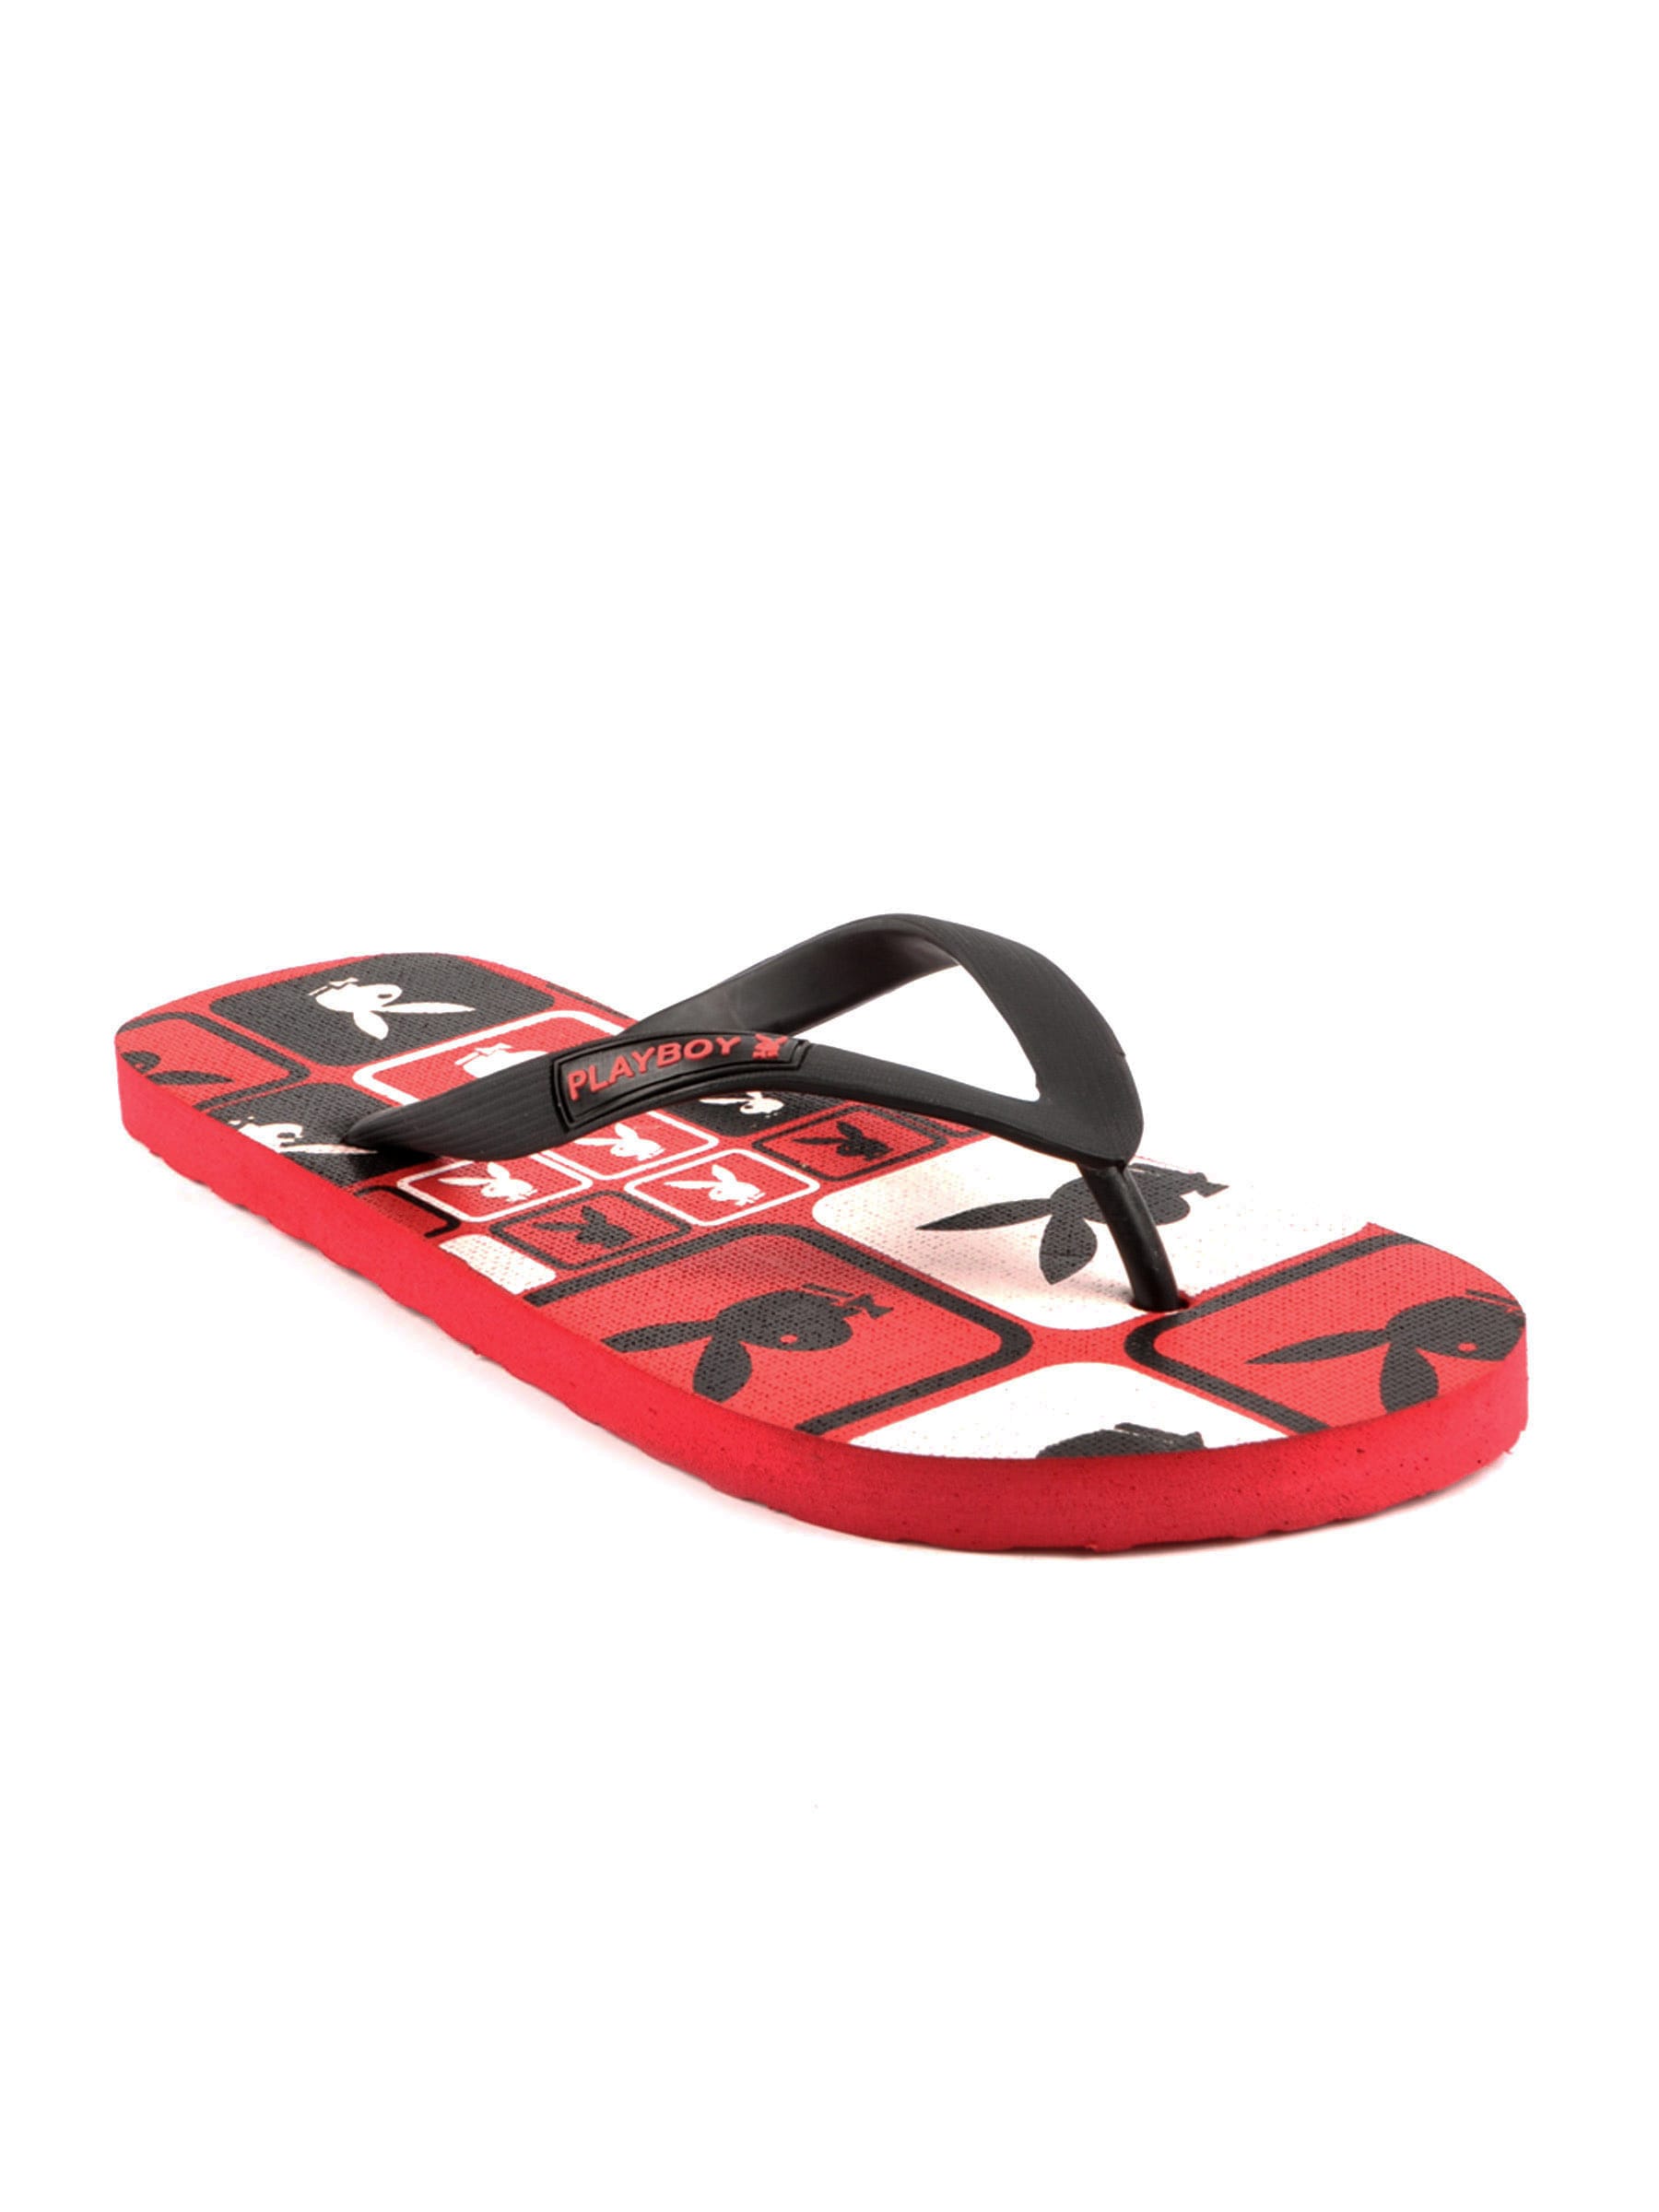 Playboy Men Casual Red Slippers